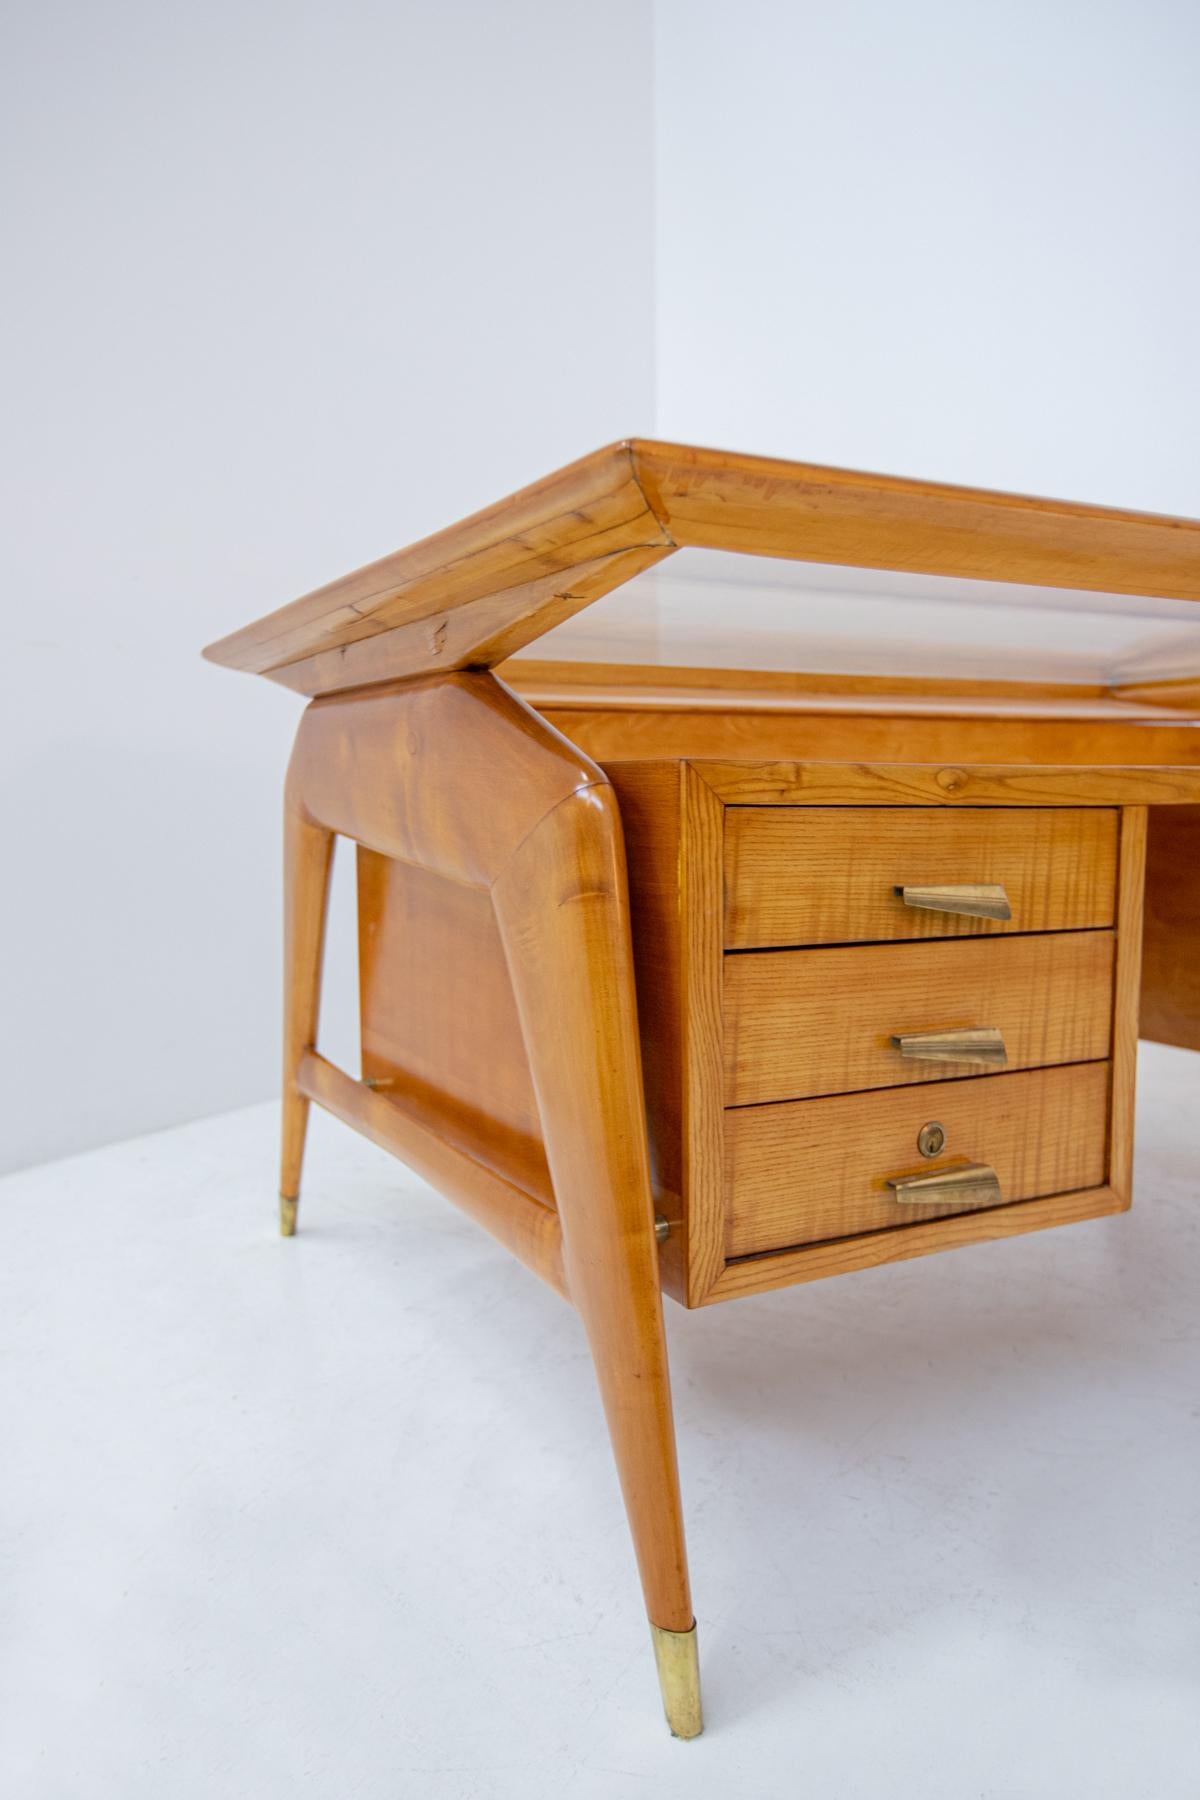 Carlo de Carli Important Desk in Wood Glass and Brass, 1950s Published 6